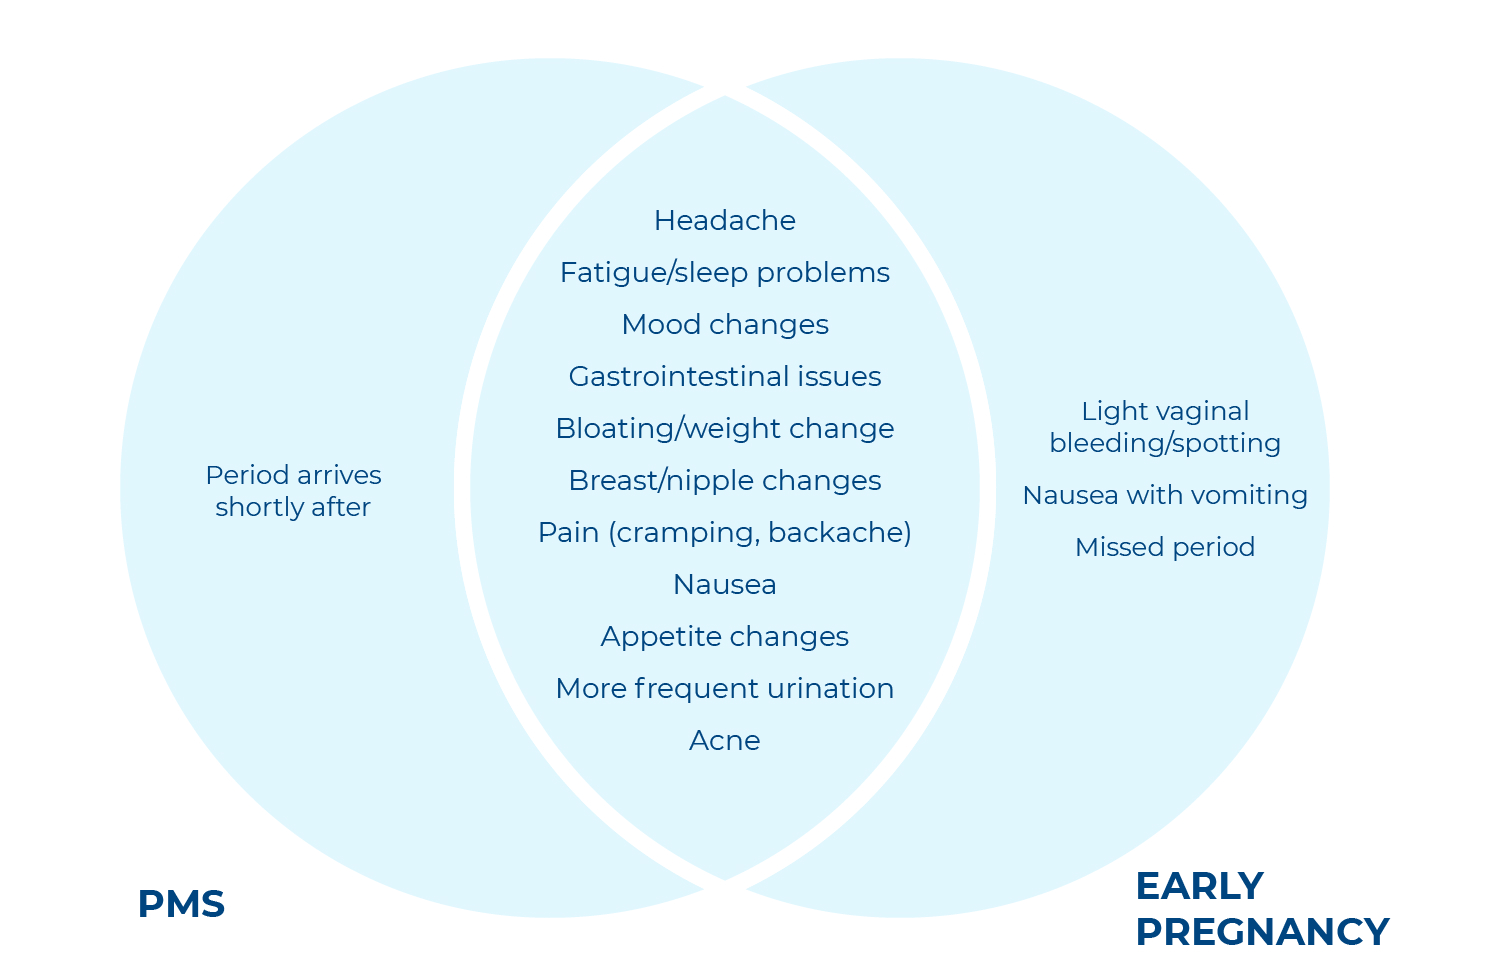 A Venn diagram showing the differences between PMS symptoms and early pregnancy symptoms